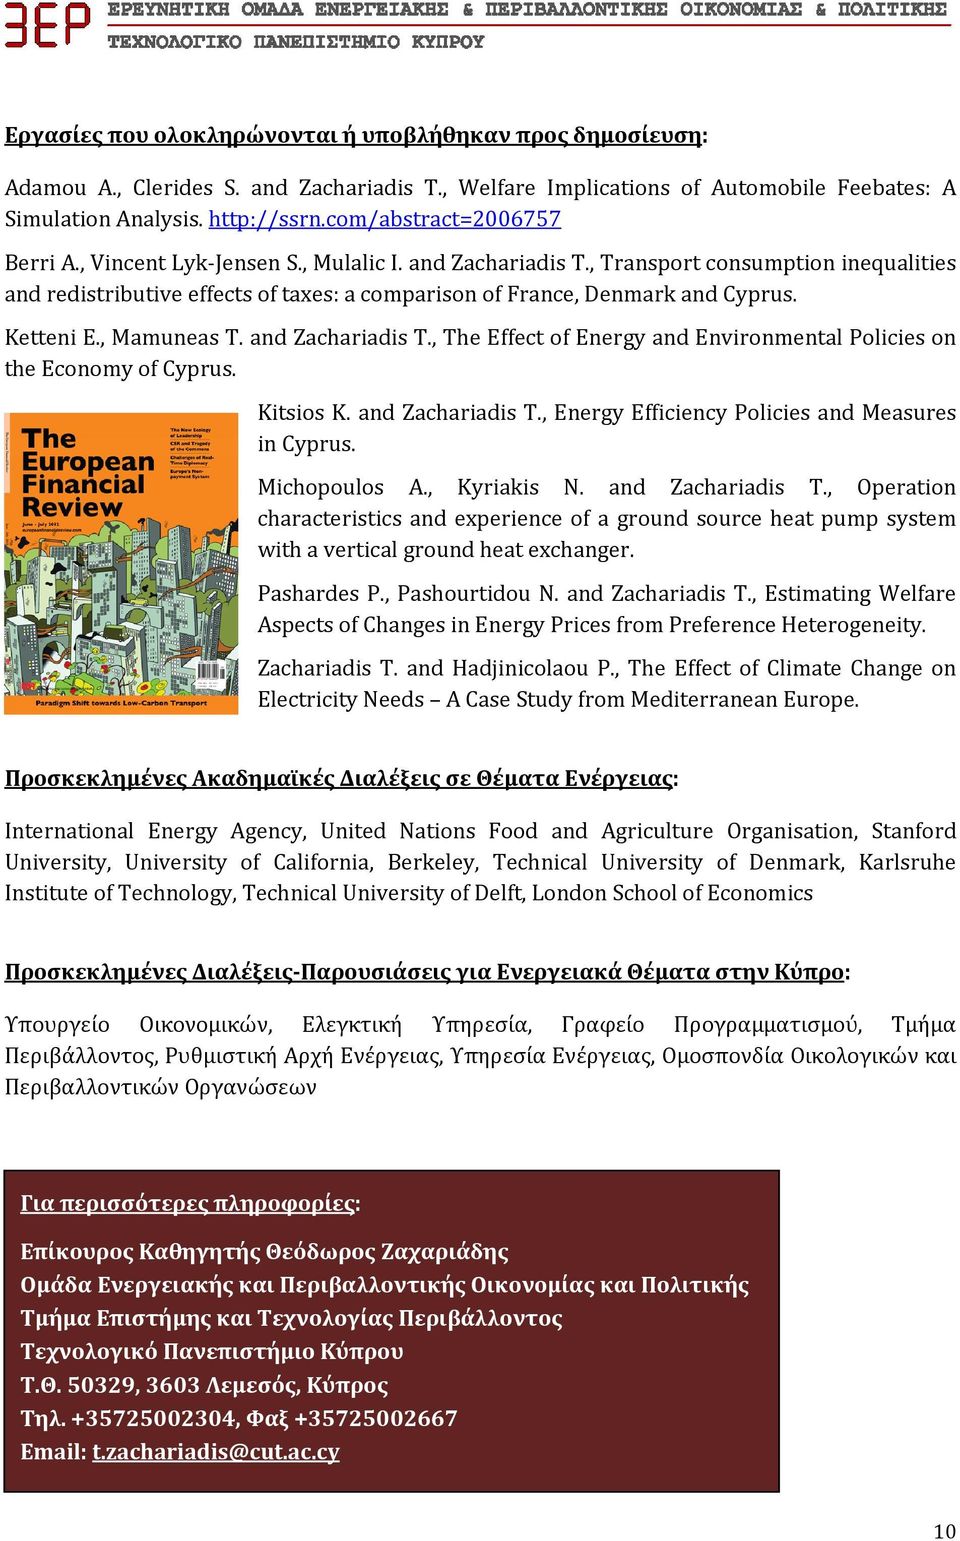 Ketteni E., Mamuneas T. and Zachariadis T., The Effect of Energy and Environmental Policies on the Economy of Cyprus. Kitsios K. and Zachariadis T., Energy Efficiency Policies and Measures in Cyprus.